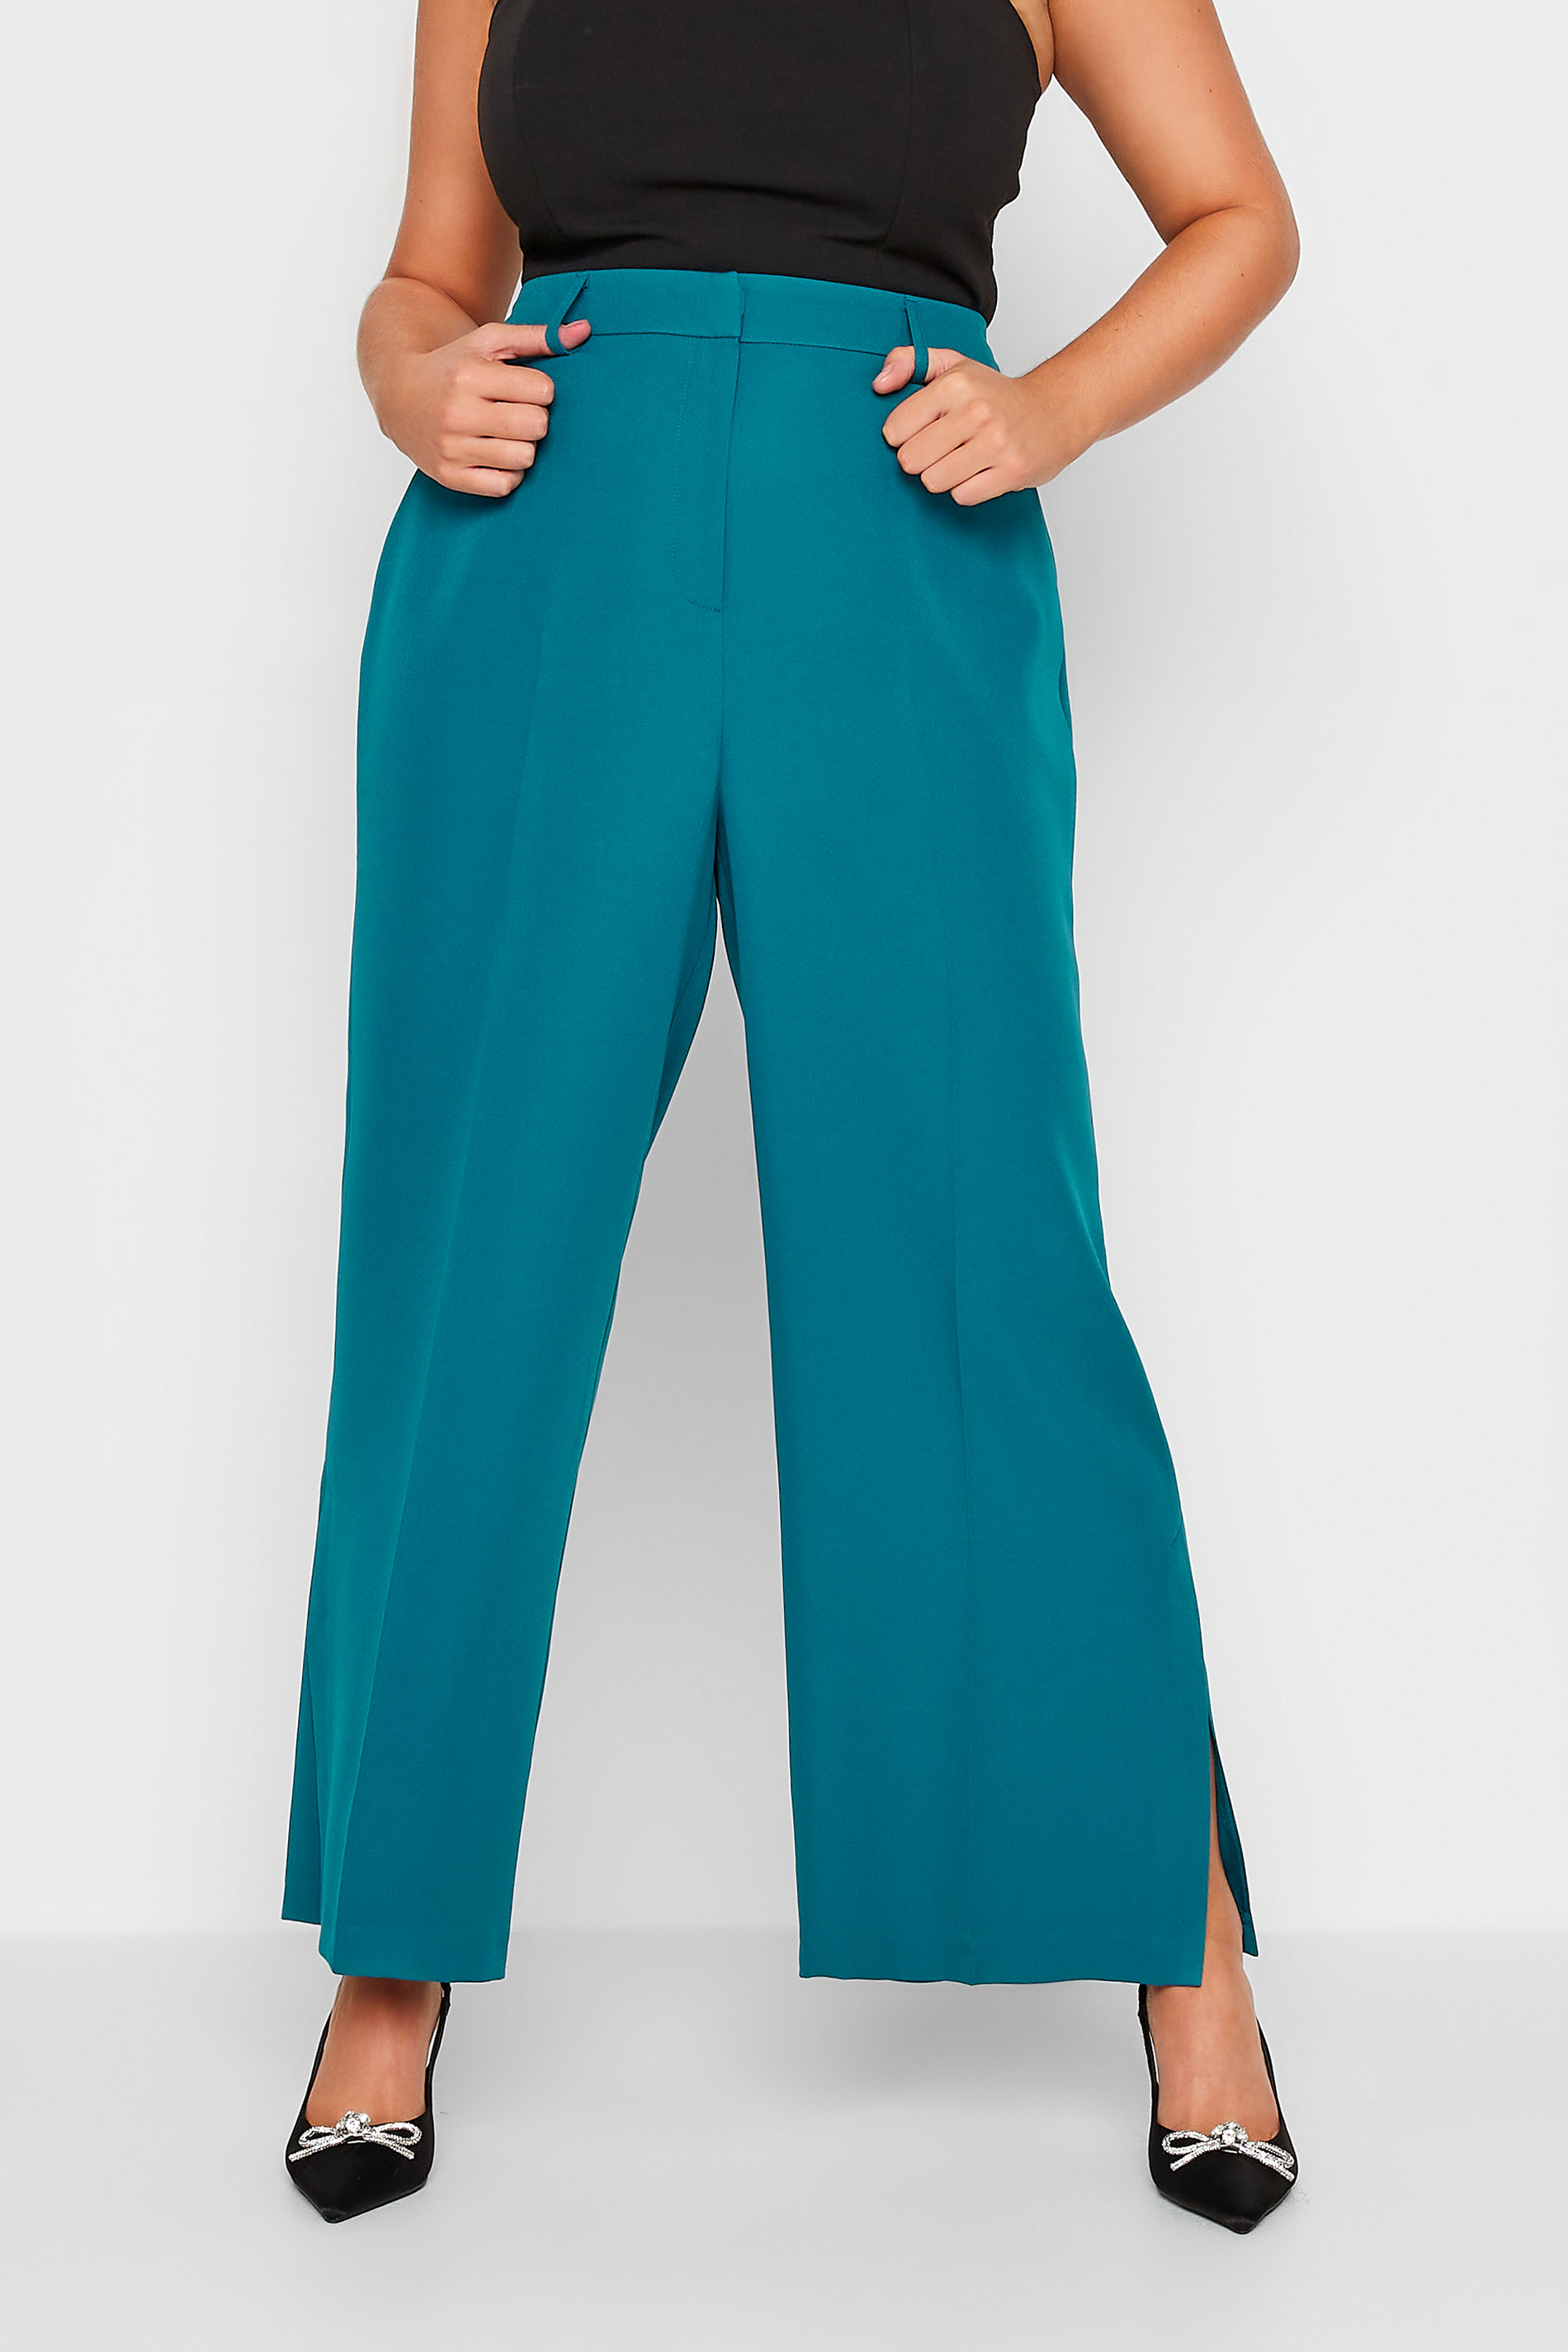 Plus Size Teal Blue Split Hem Flared Trousers| Yours Clothing 1